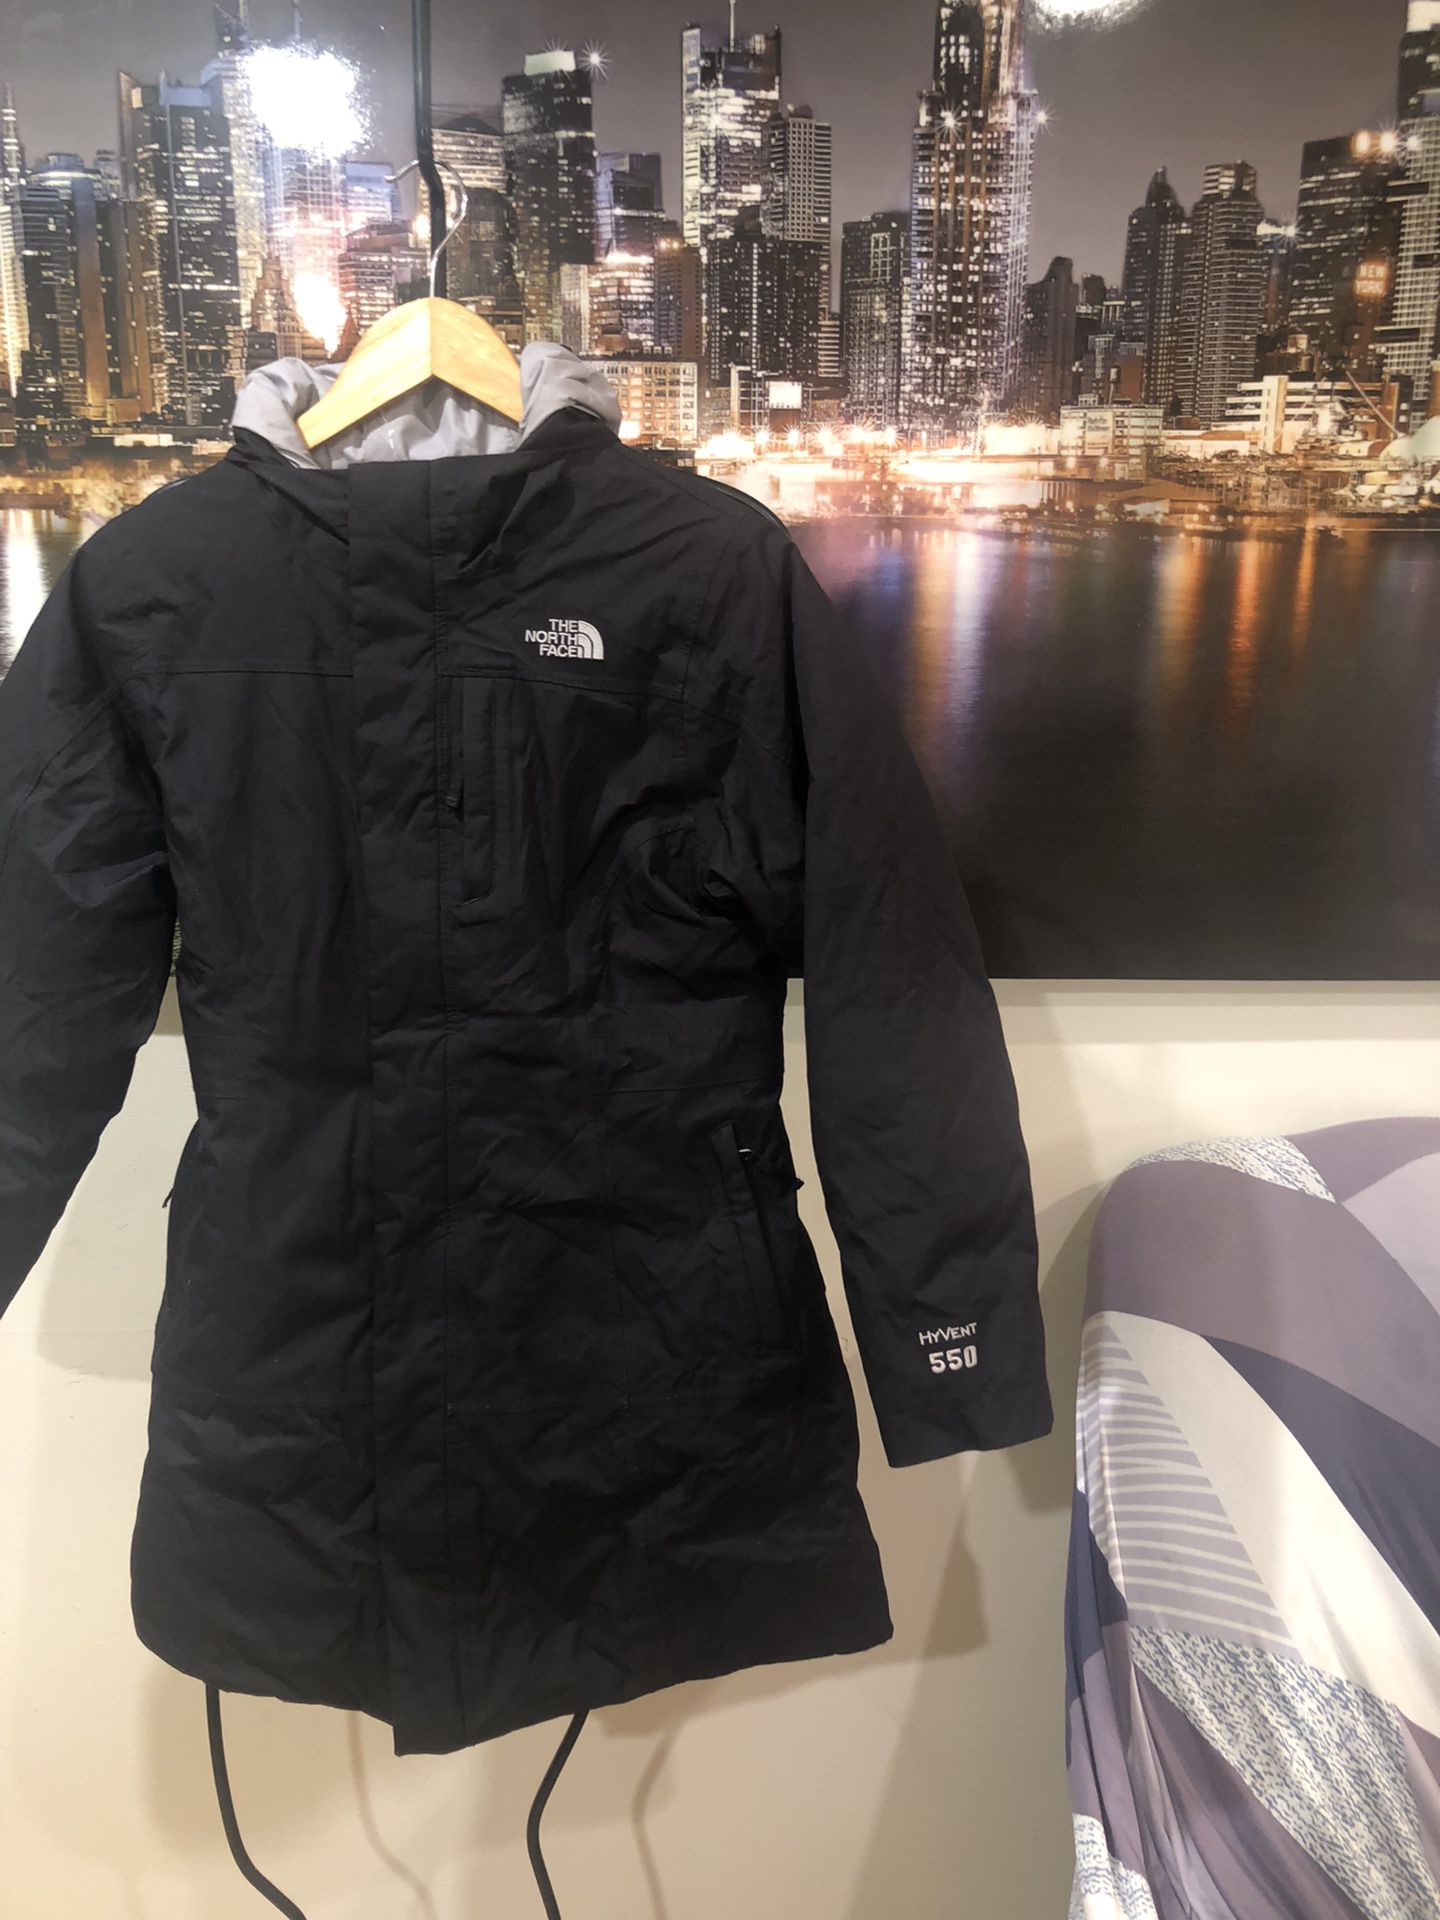 THE NORTH FACE JACKET SIZE L